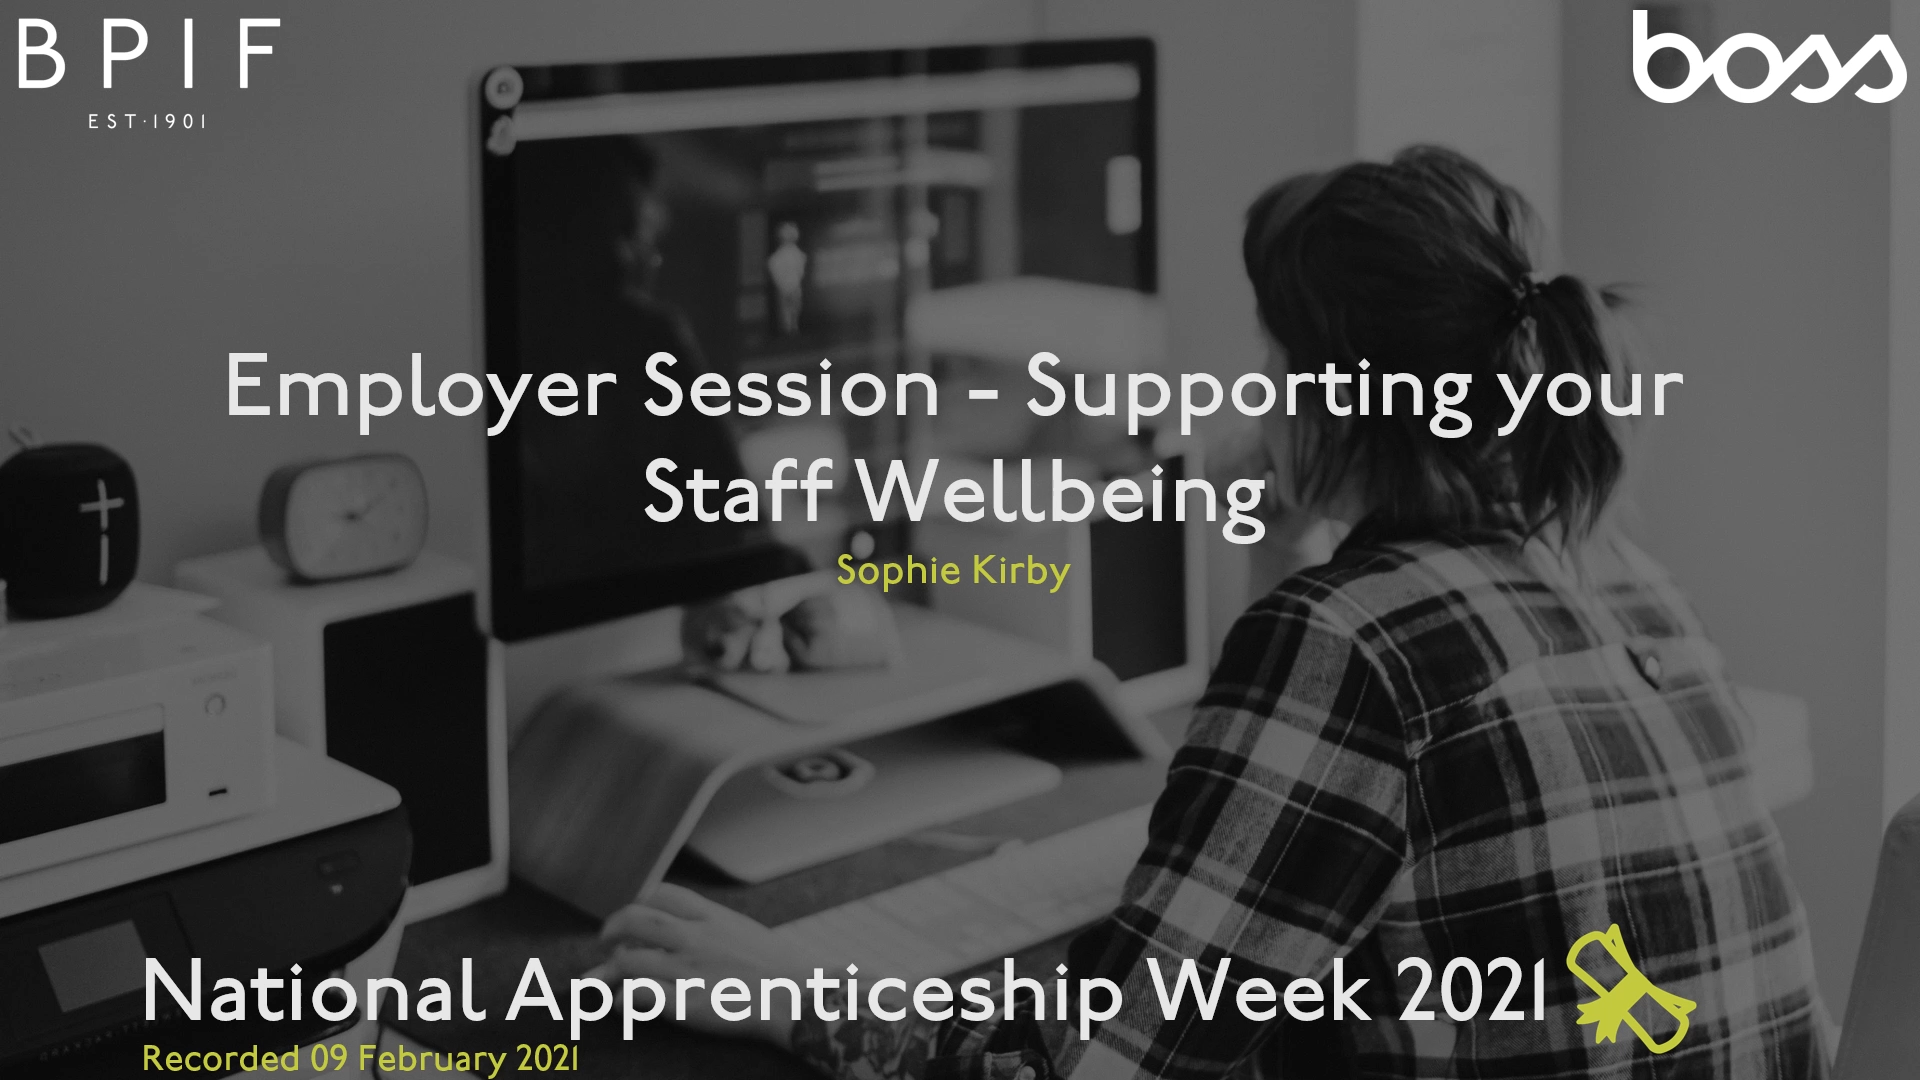 Employer Session - Supporting your Staff Wellbeing